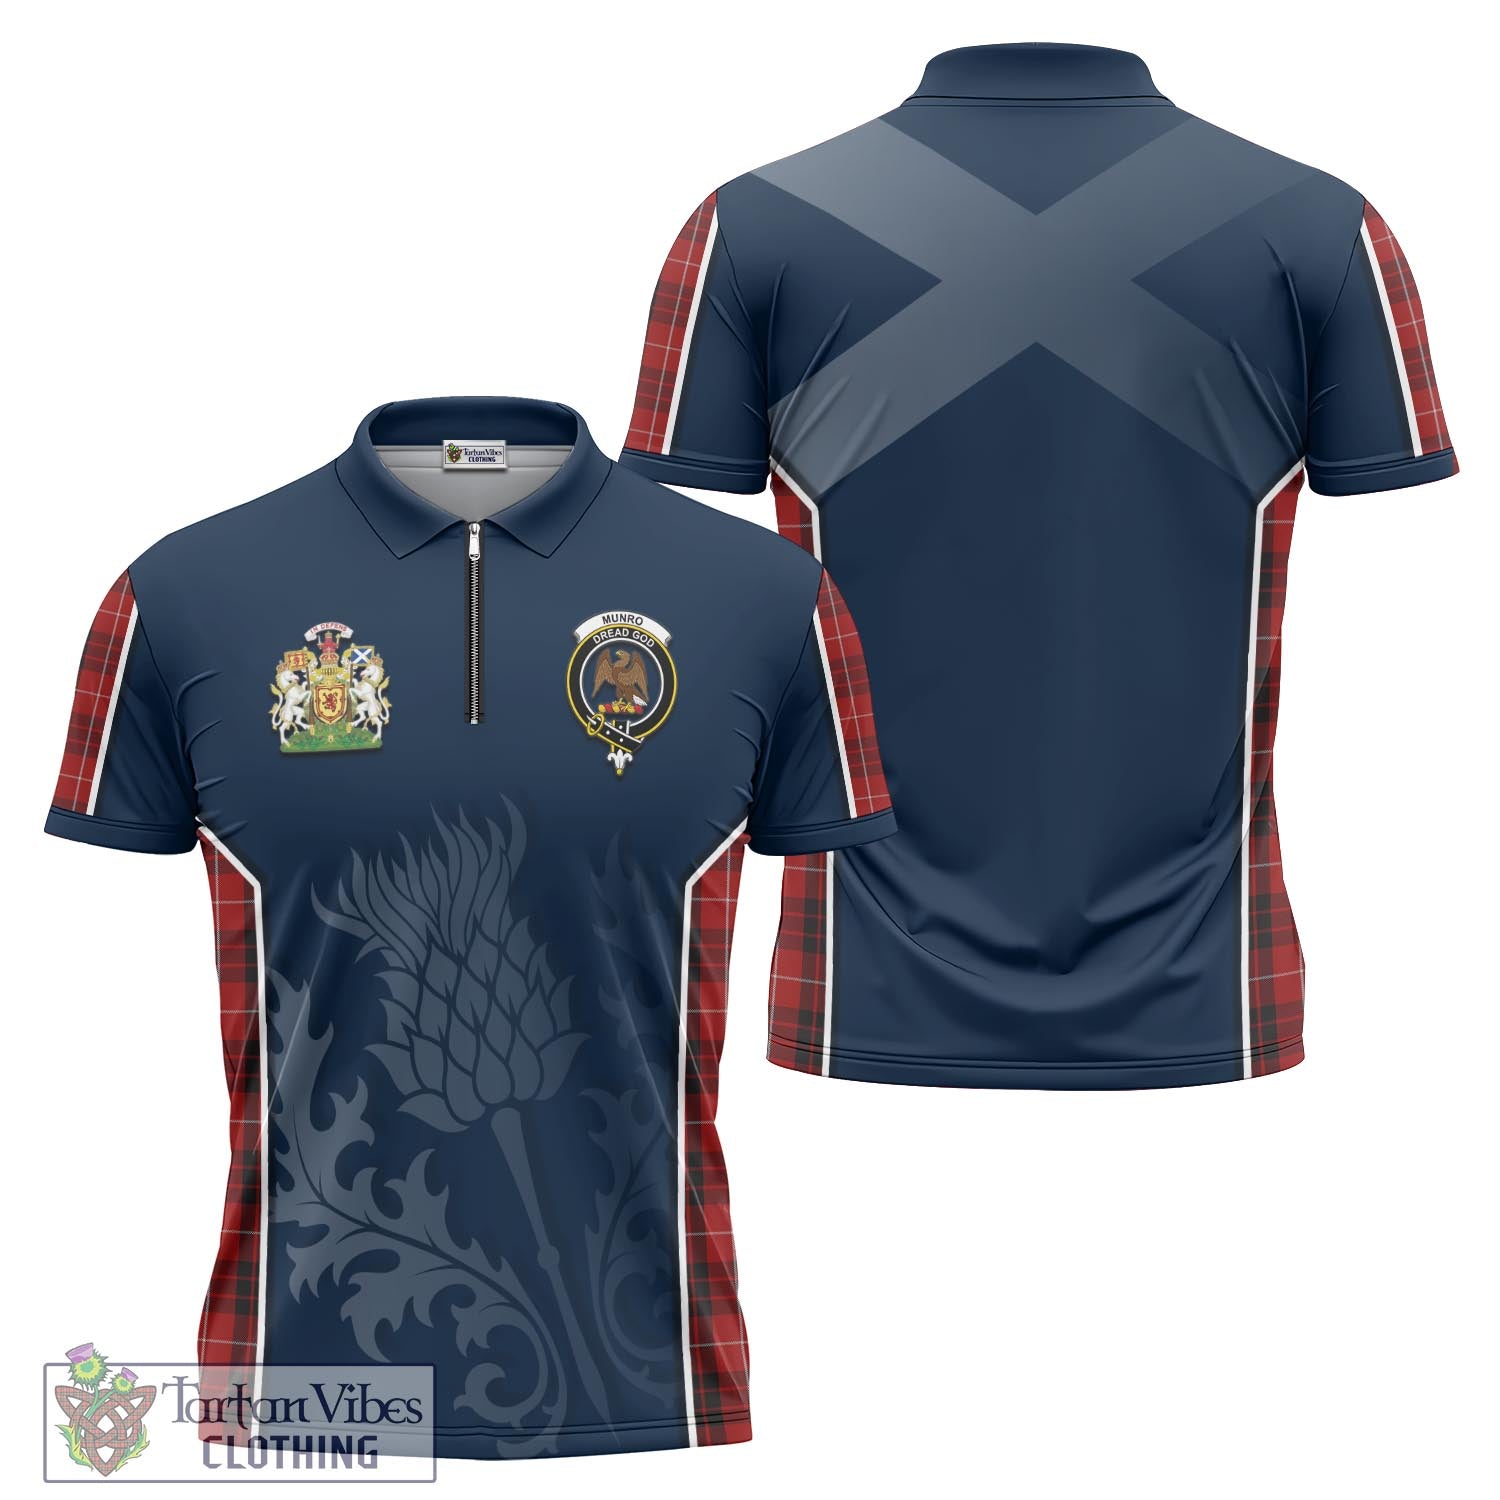 Tartan Vibes Clothing Munro Black and Red Tartan Zipper Polo Shirt with Family Crest and Scottish Thistle Vibes Sport Style